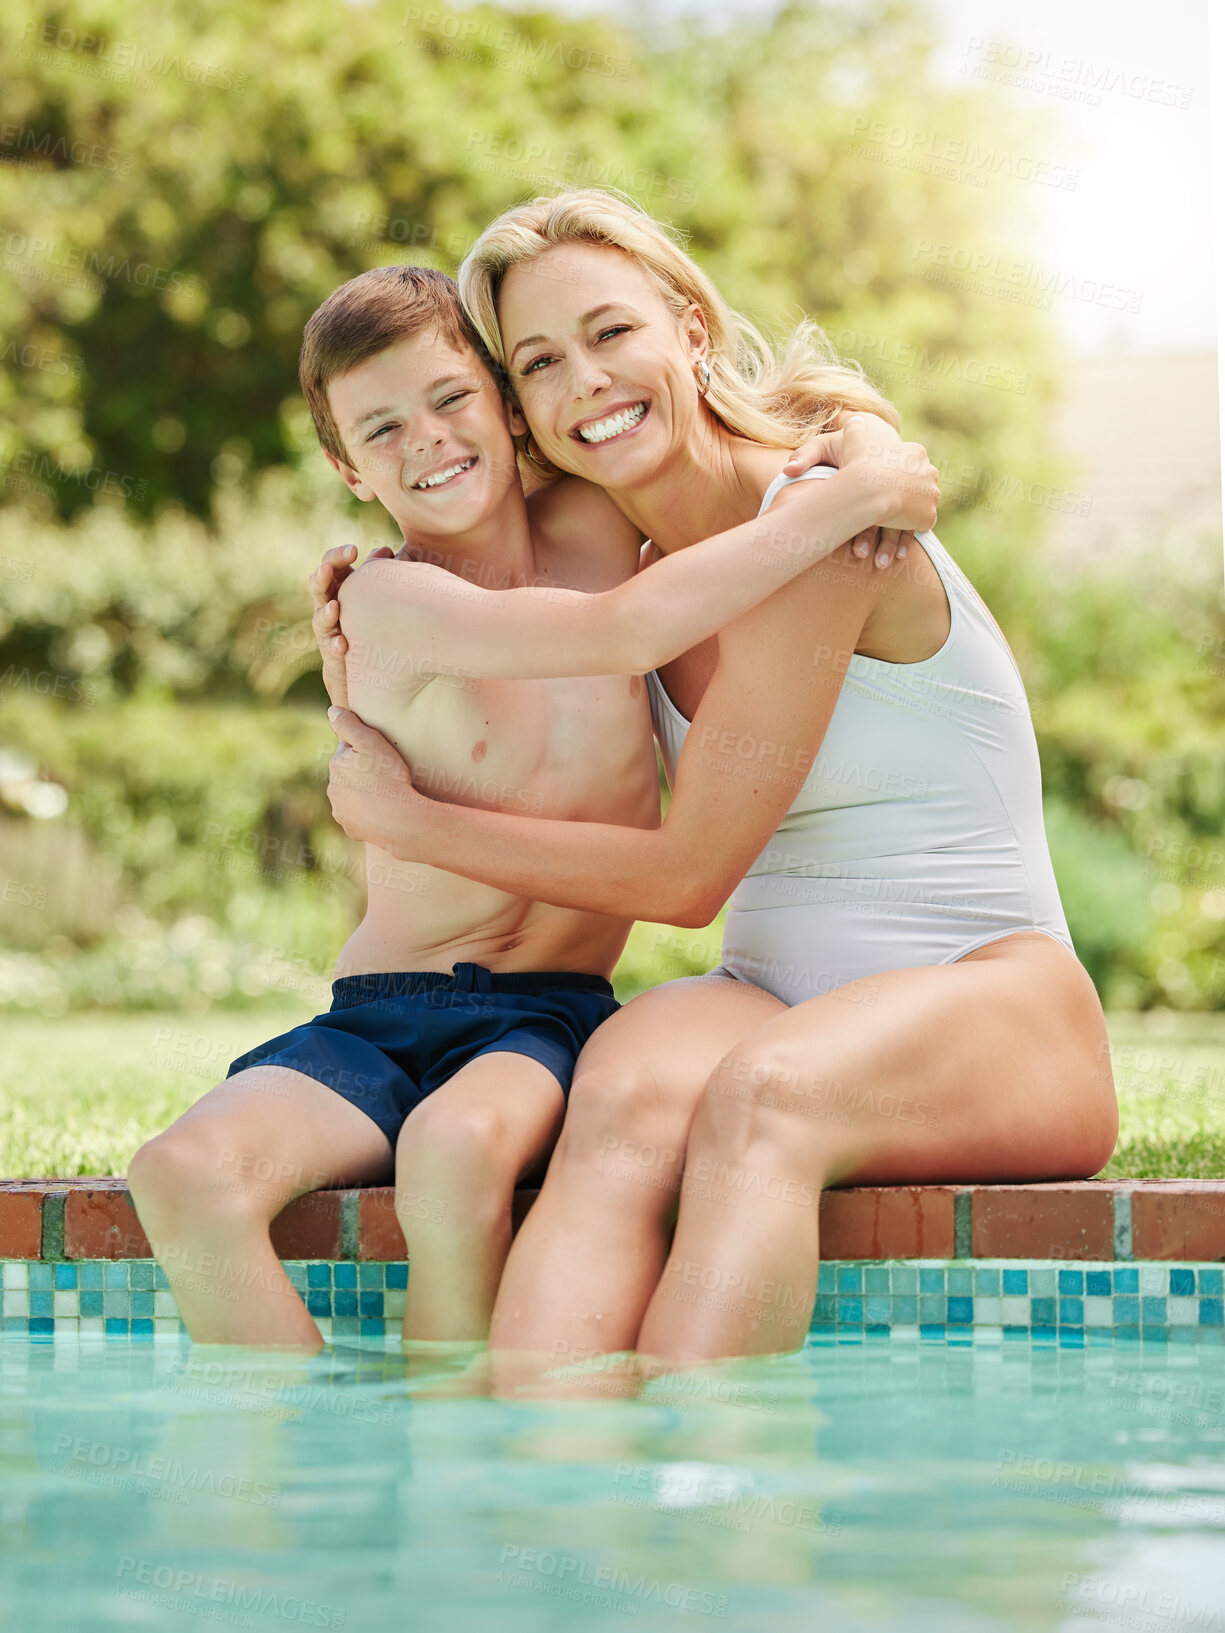 Buy stock photo Shot of a woman and her young son bonding by the poolside